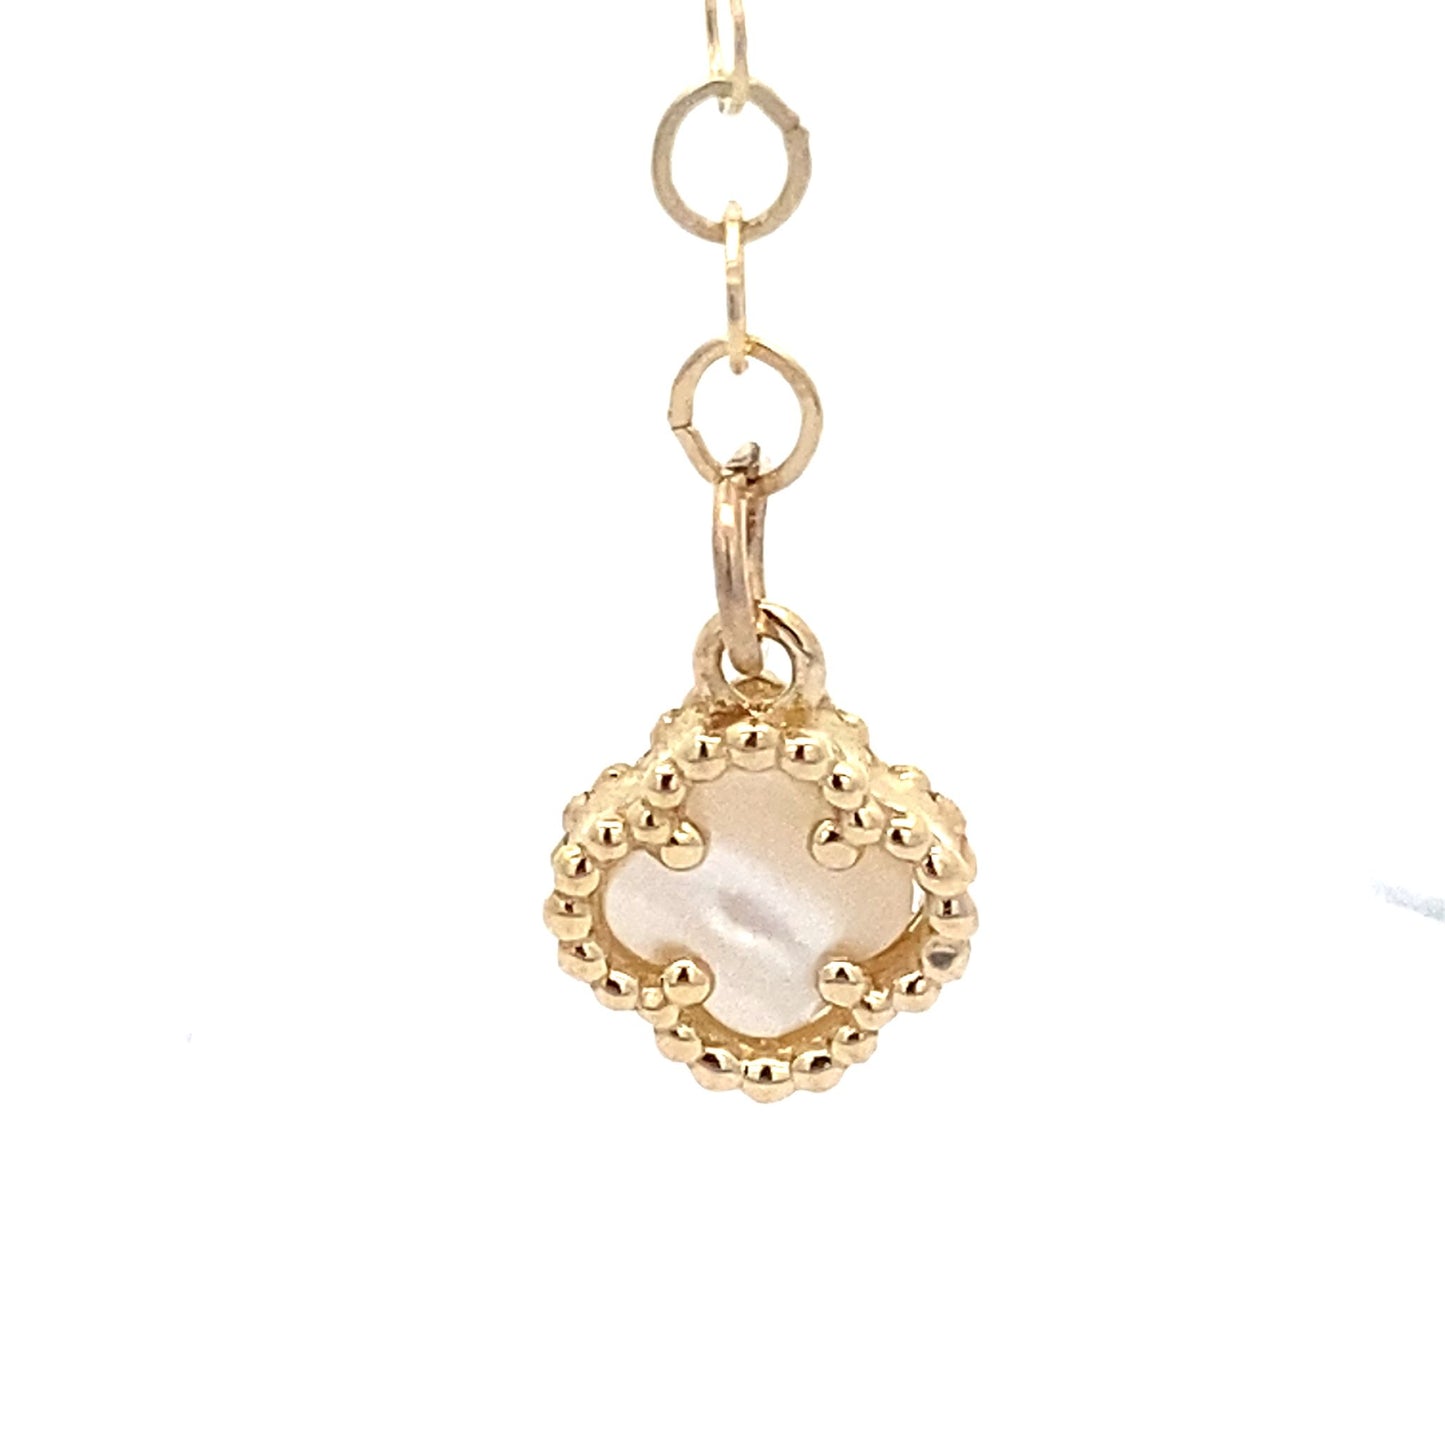 14K Yellow Gold Mother Of Pearl Flower Necklace 20In